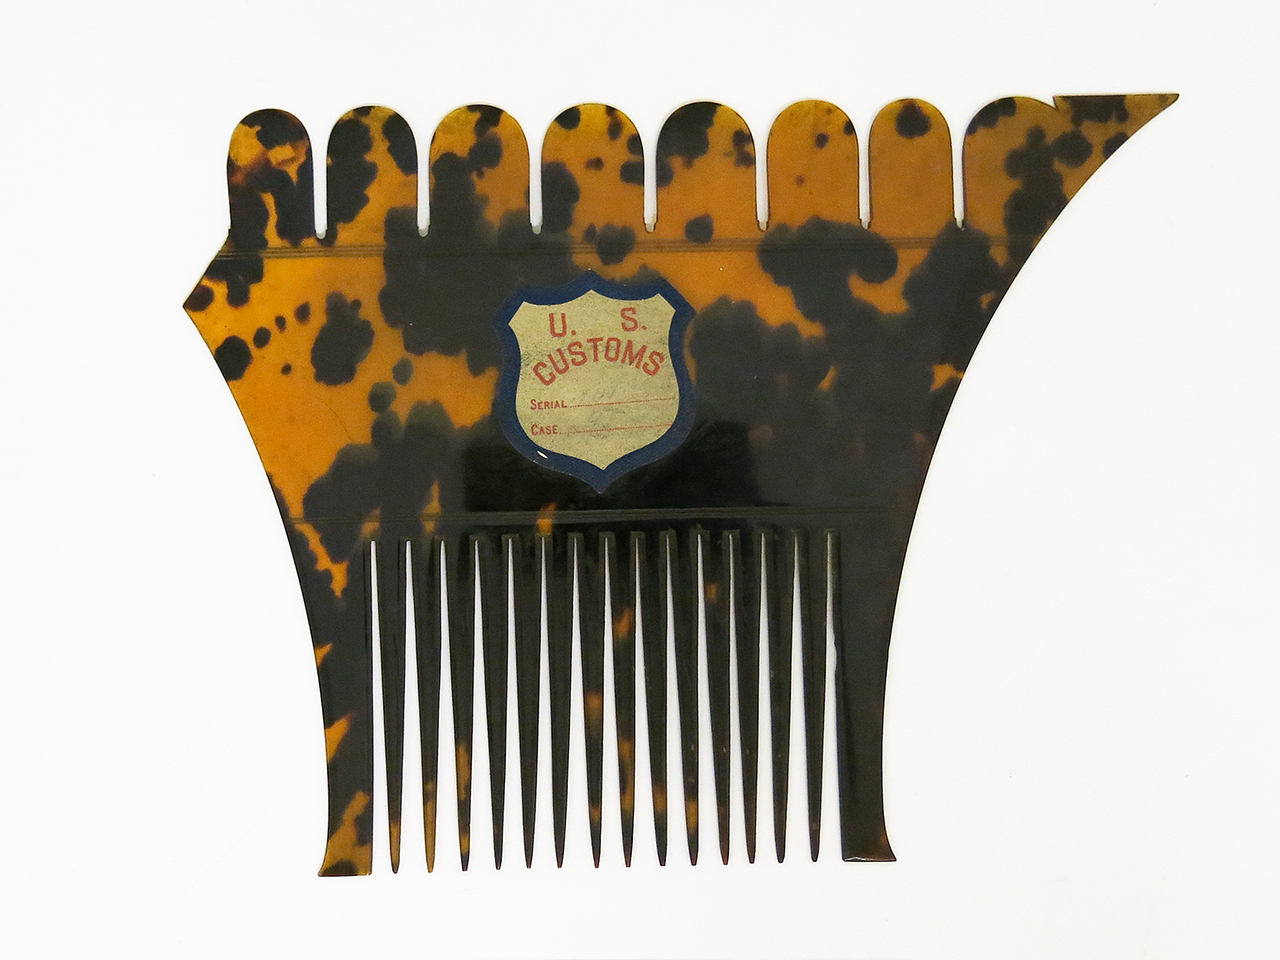 An unusually shaped comb with scalloped edging along the top and curved sides. It has a tortoise shell pattern and a faded sticker on the front that says 'U.S Customs' on it.